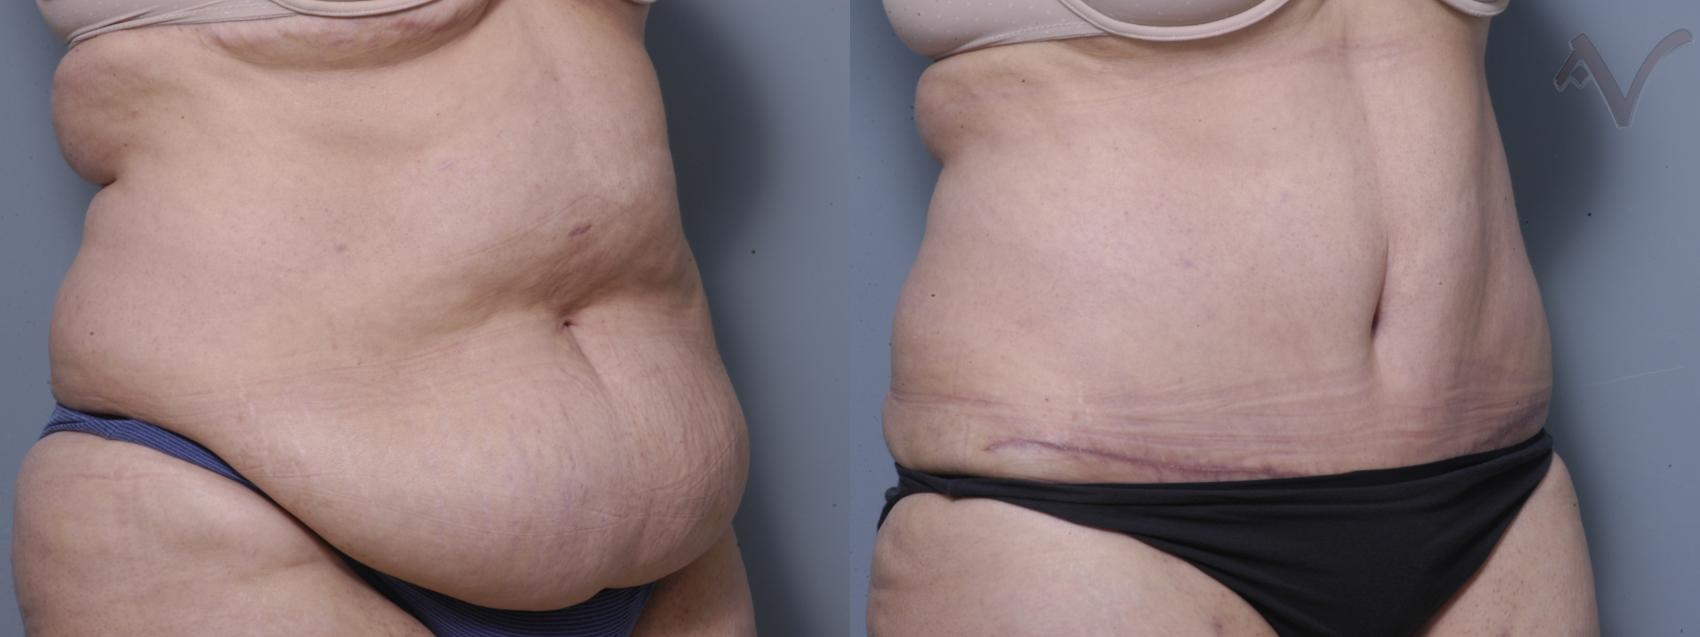 Before & After Tummy Tuck Case 240 Right Oblique View in Los Angeles, CA